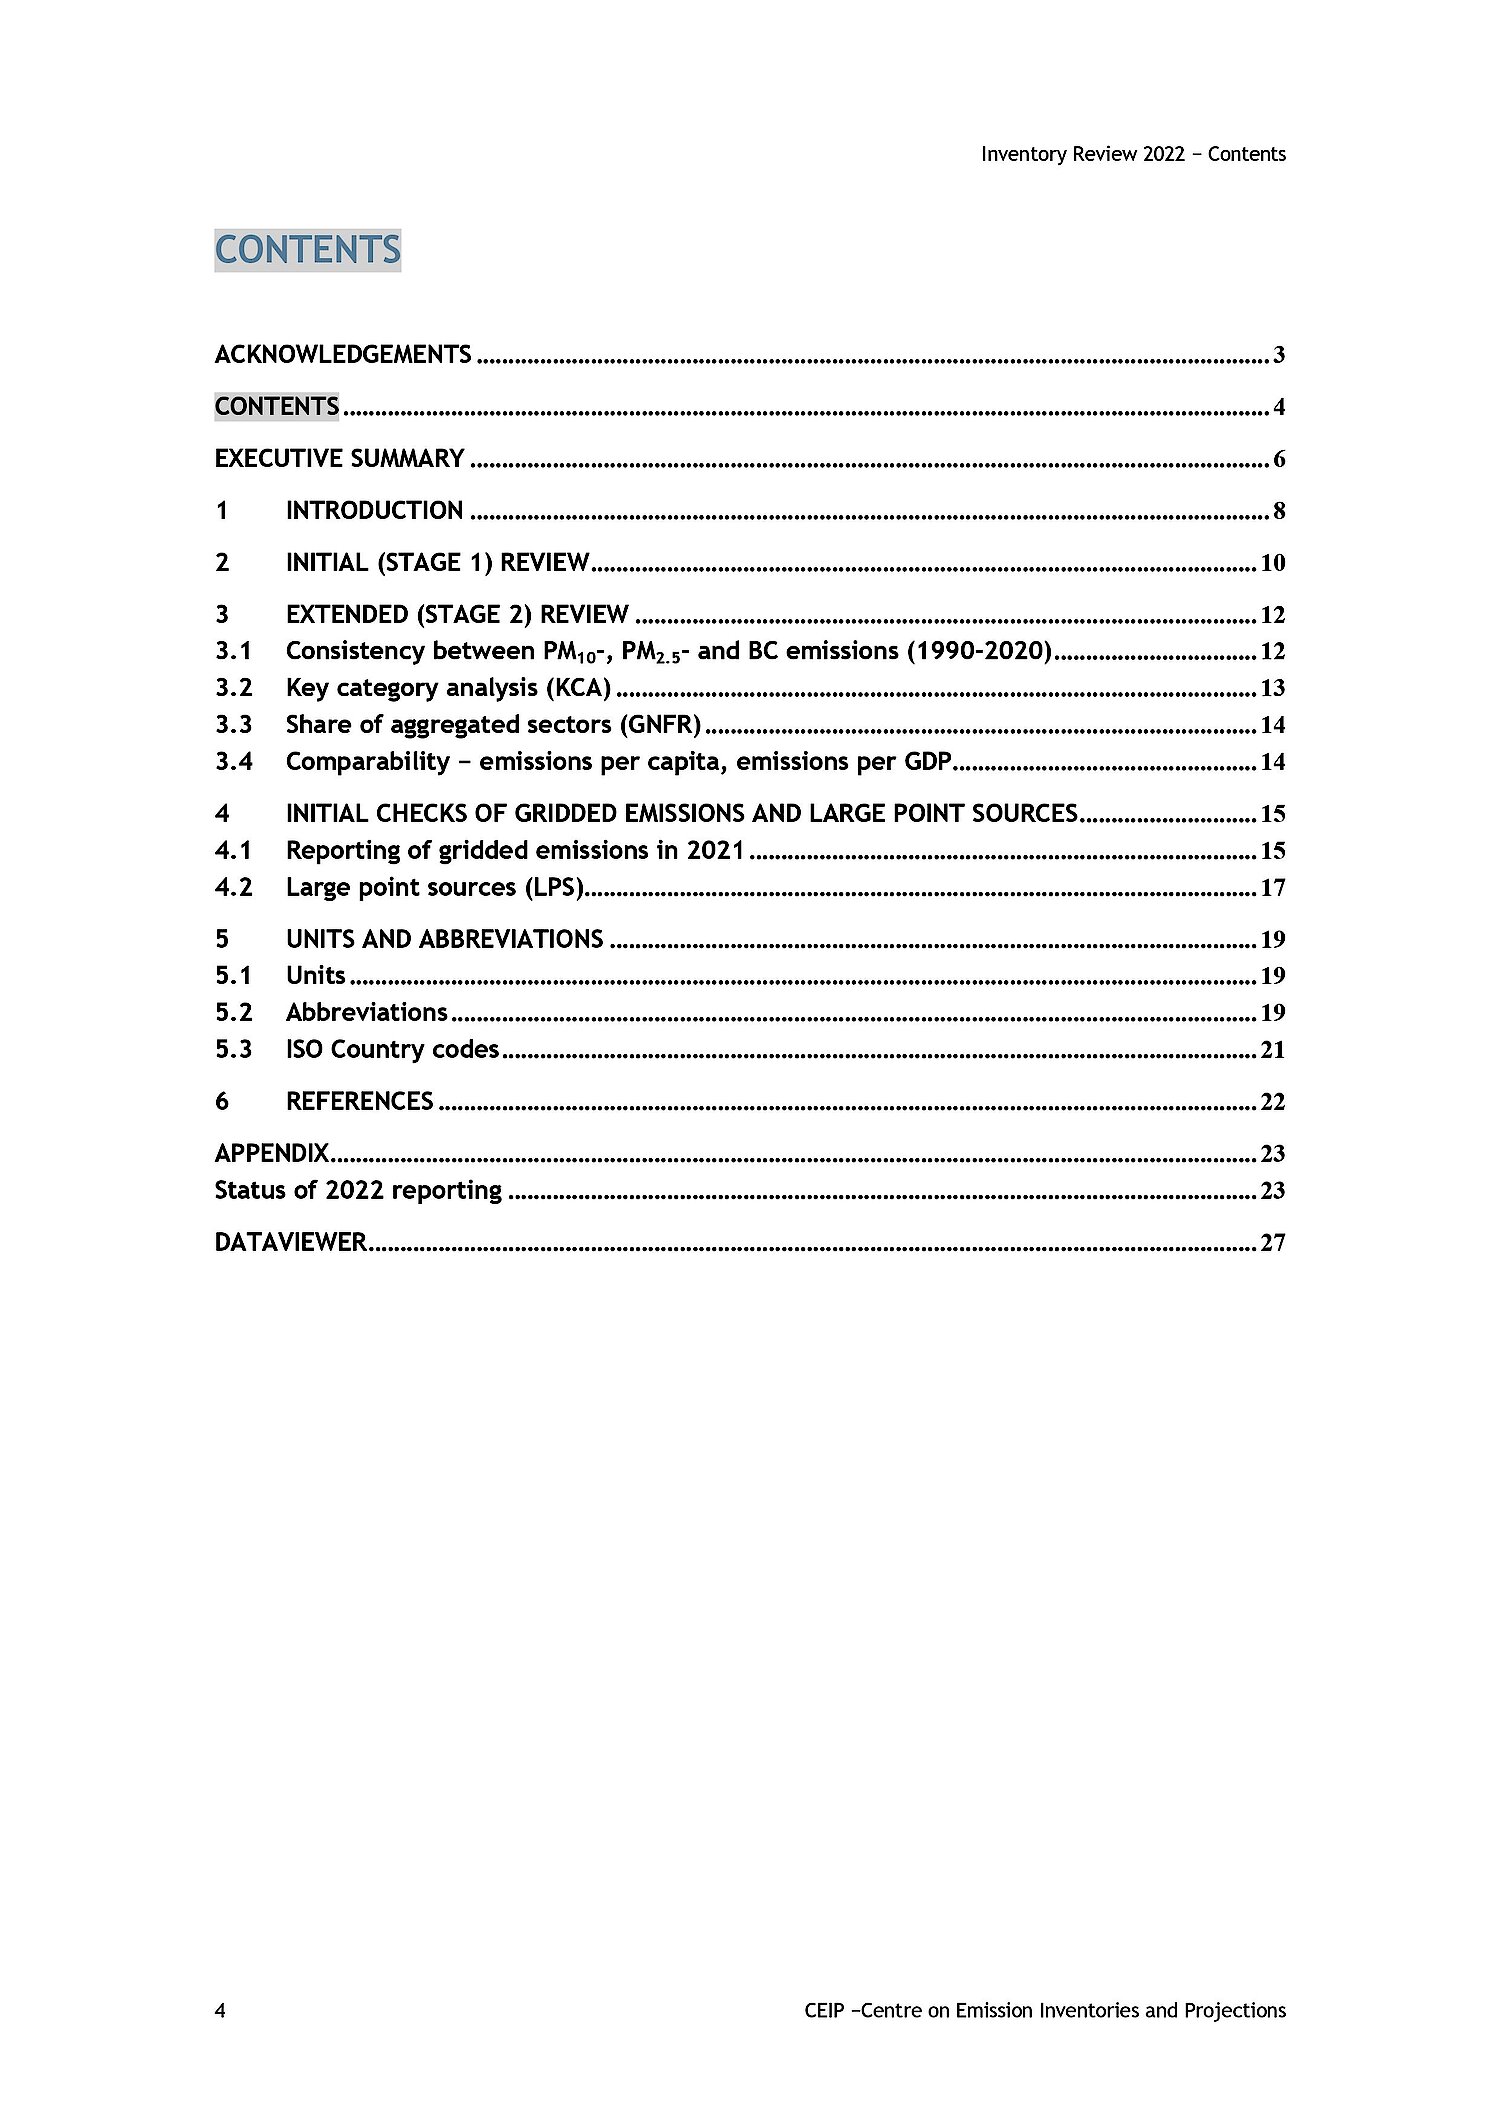 Table of Conent Review Report 2022